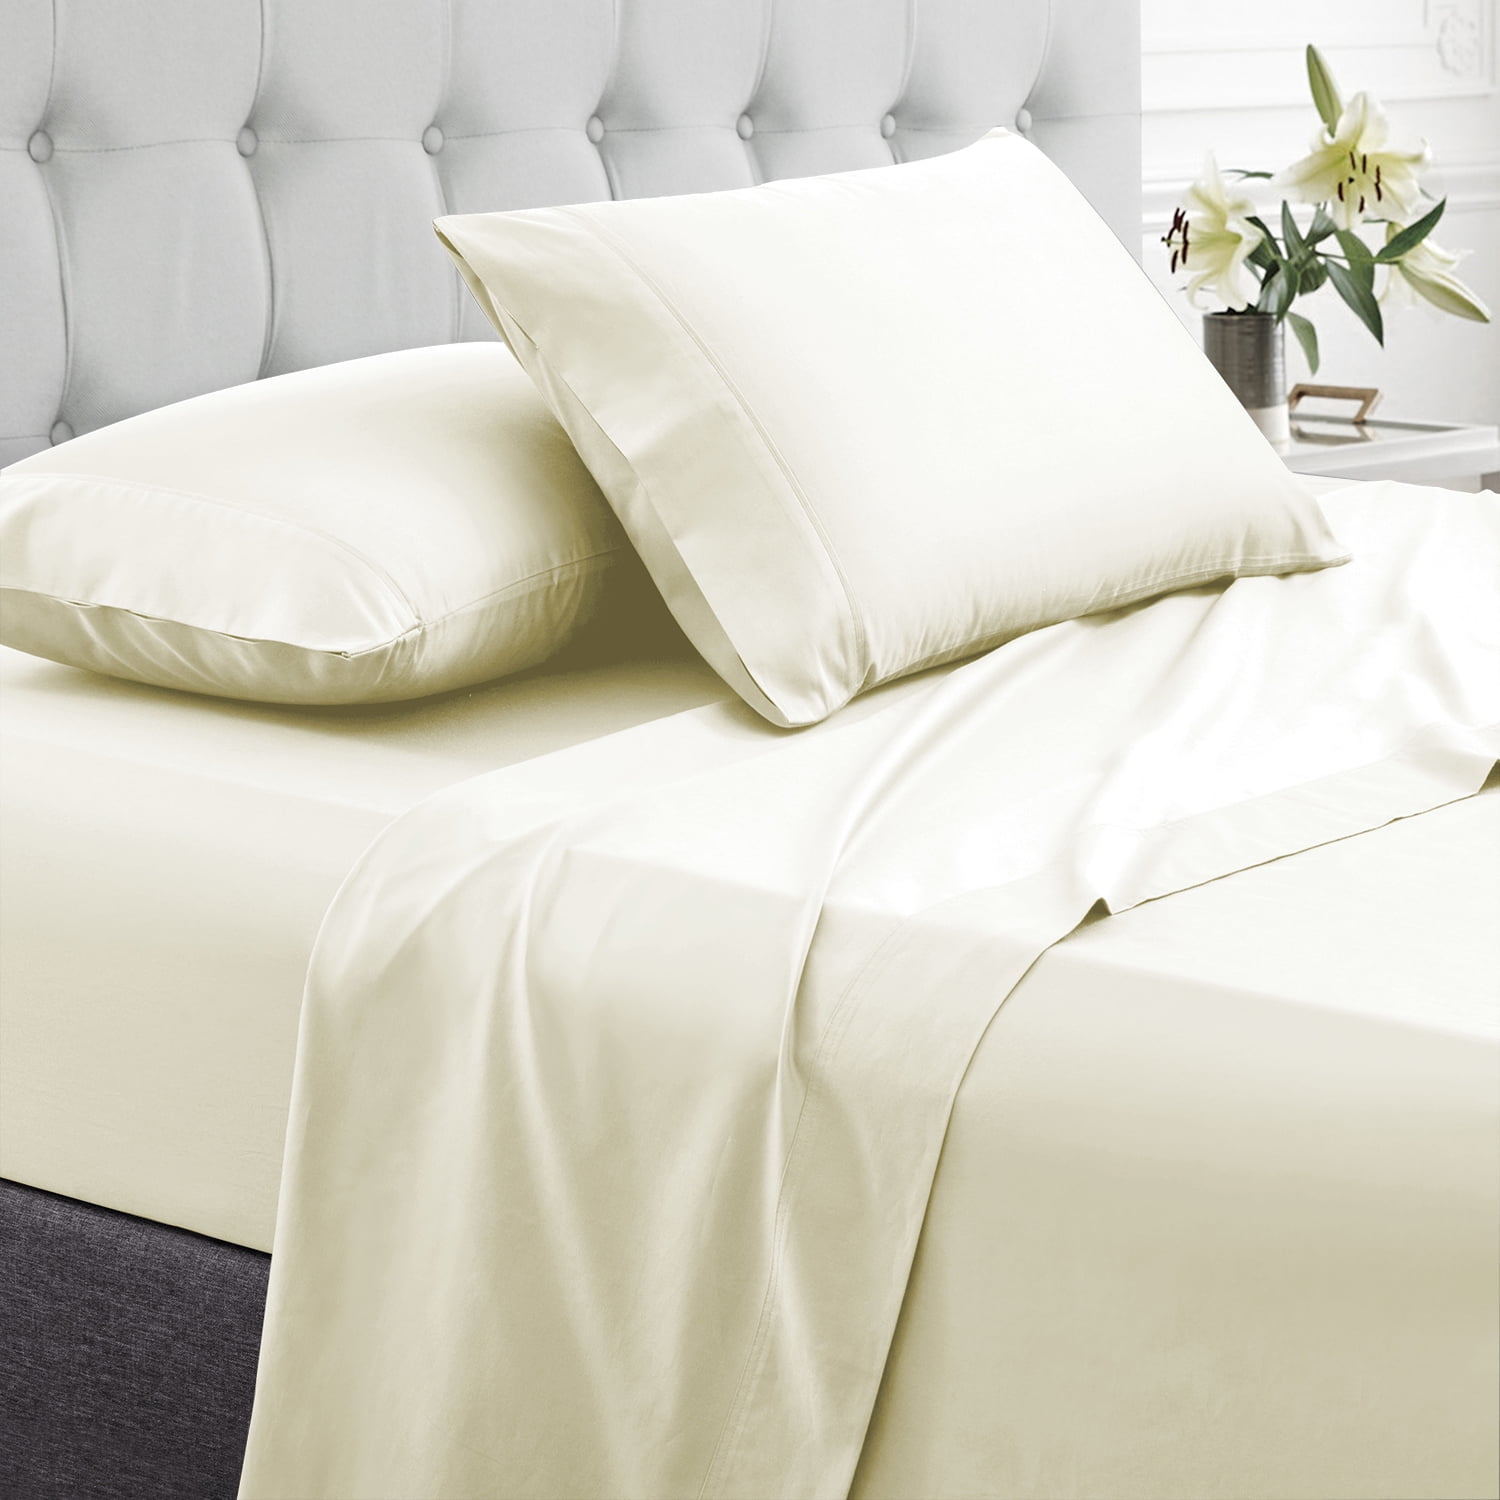 100% Egyptian Cotton Flat Bed Sheets 200tc Ivory Color Single Double King Sizes 